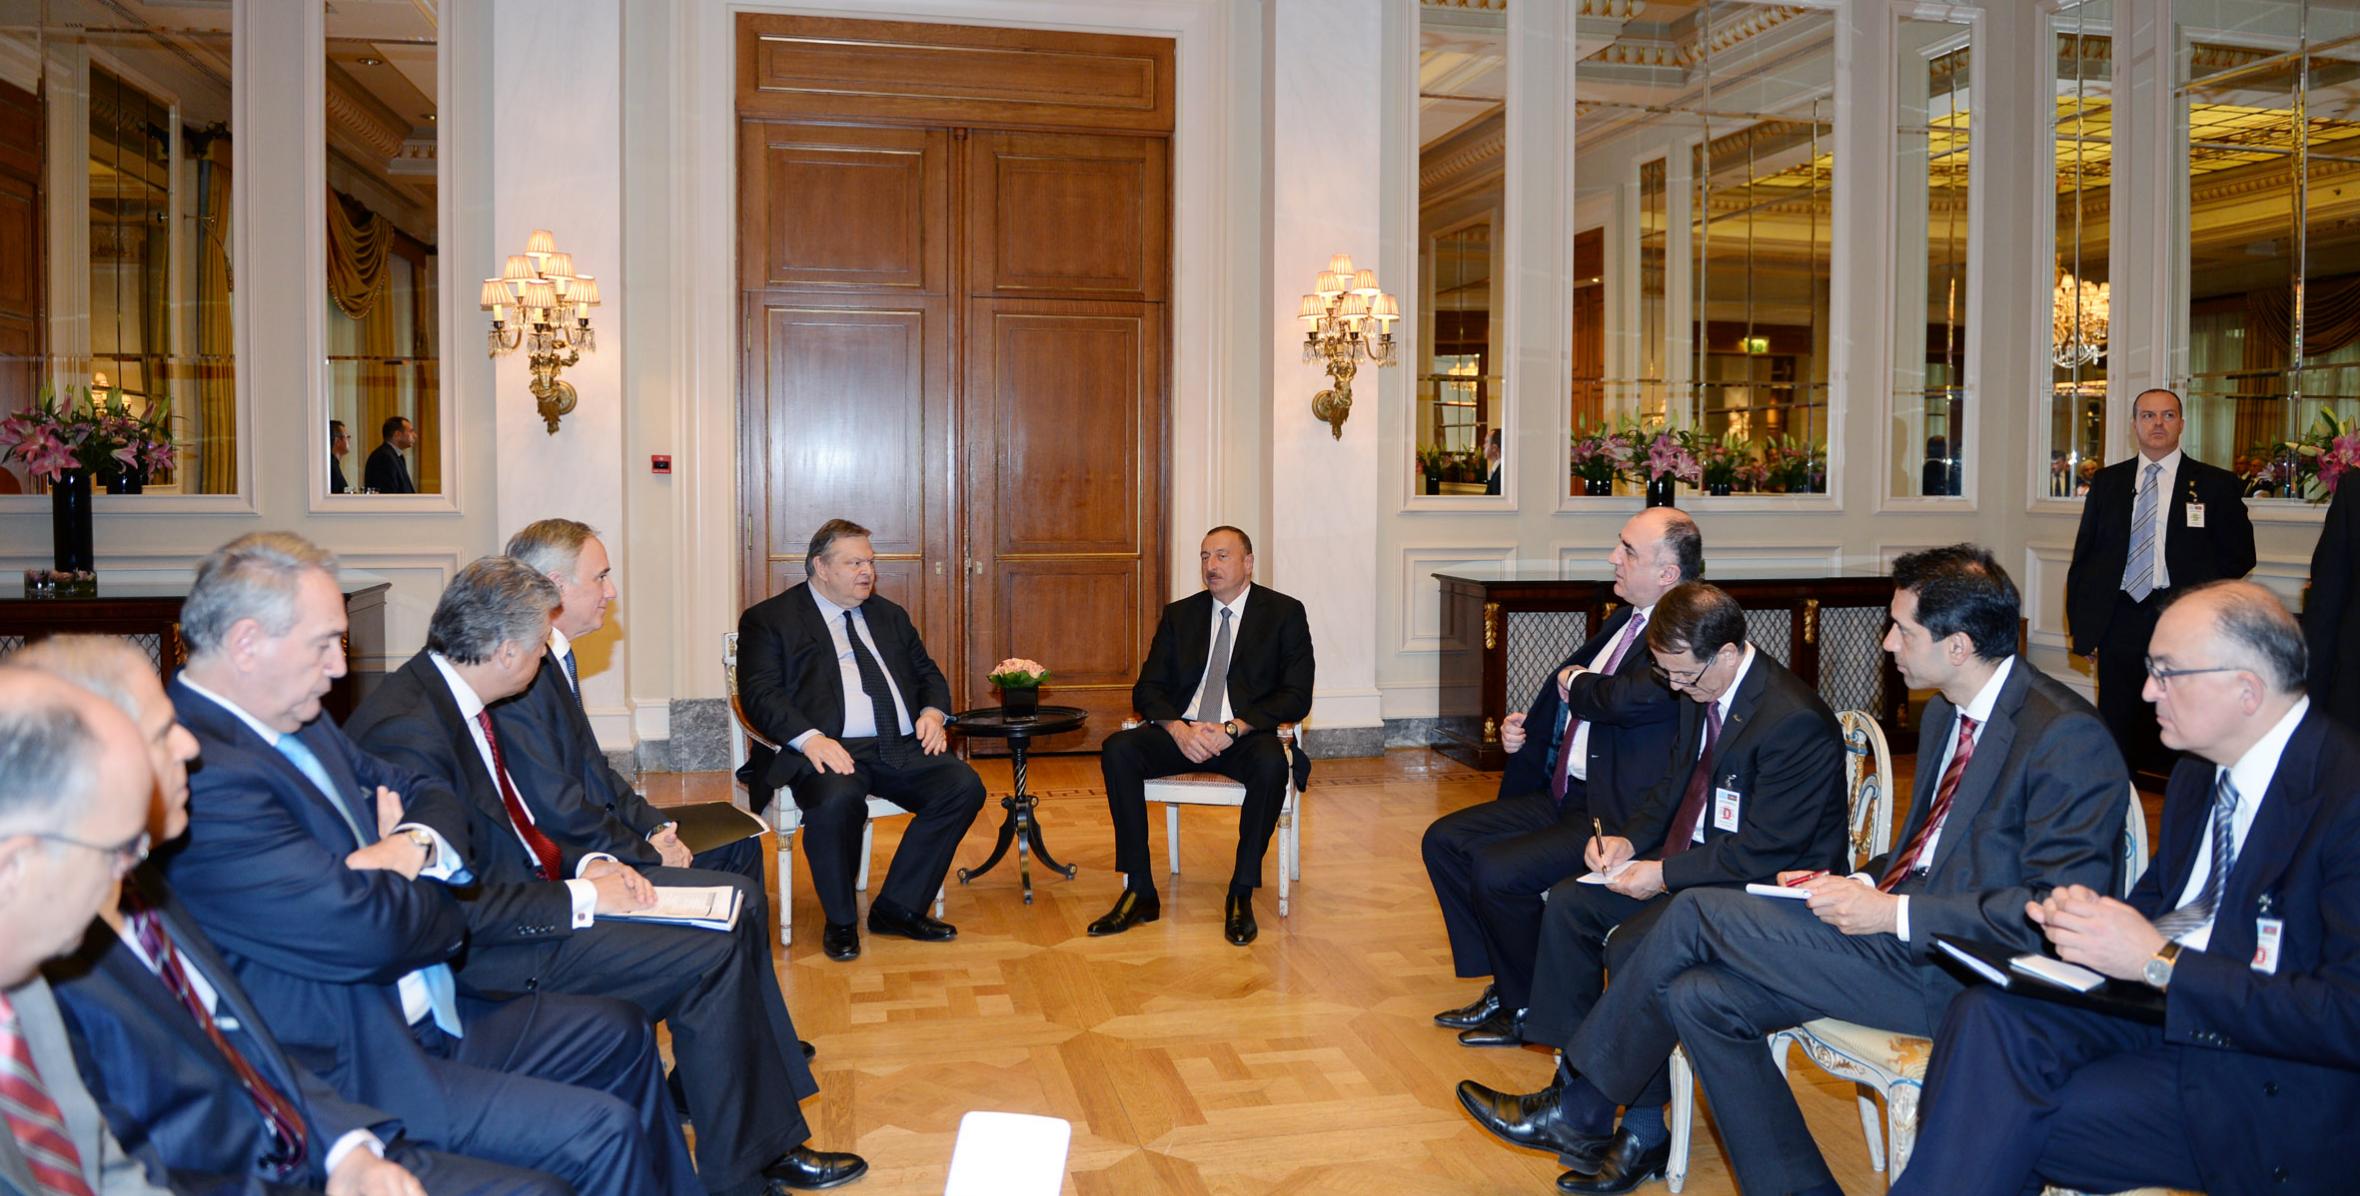 Ilham Aliyev met with Deputy Prime Minister, Minister of Foreign Affairs of Greece Evangelos Venizelos